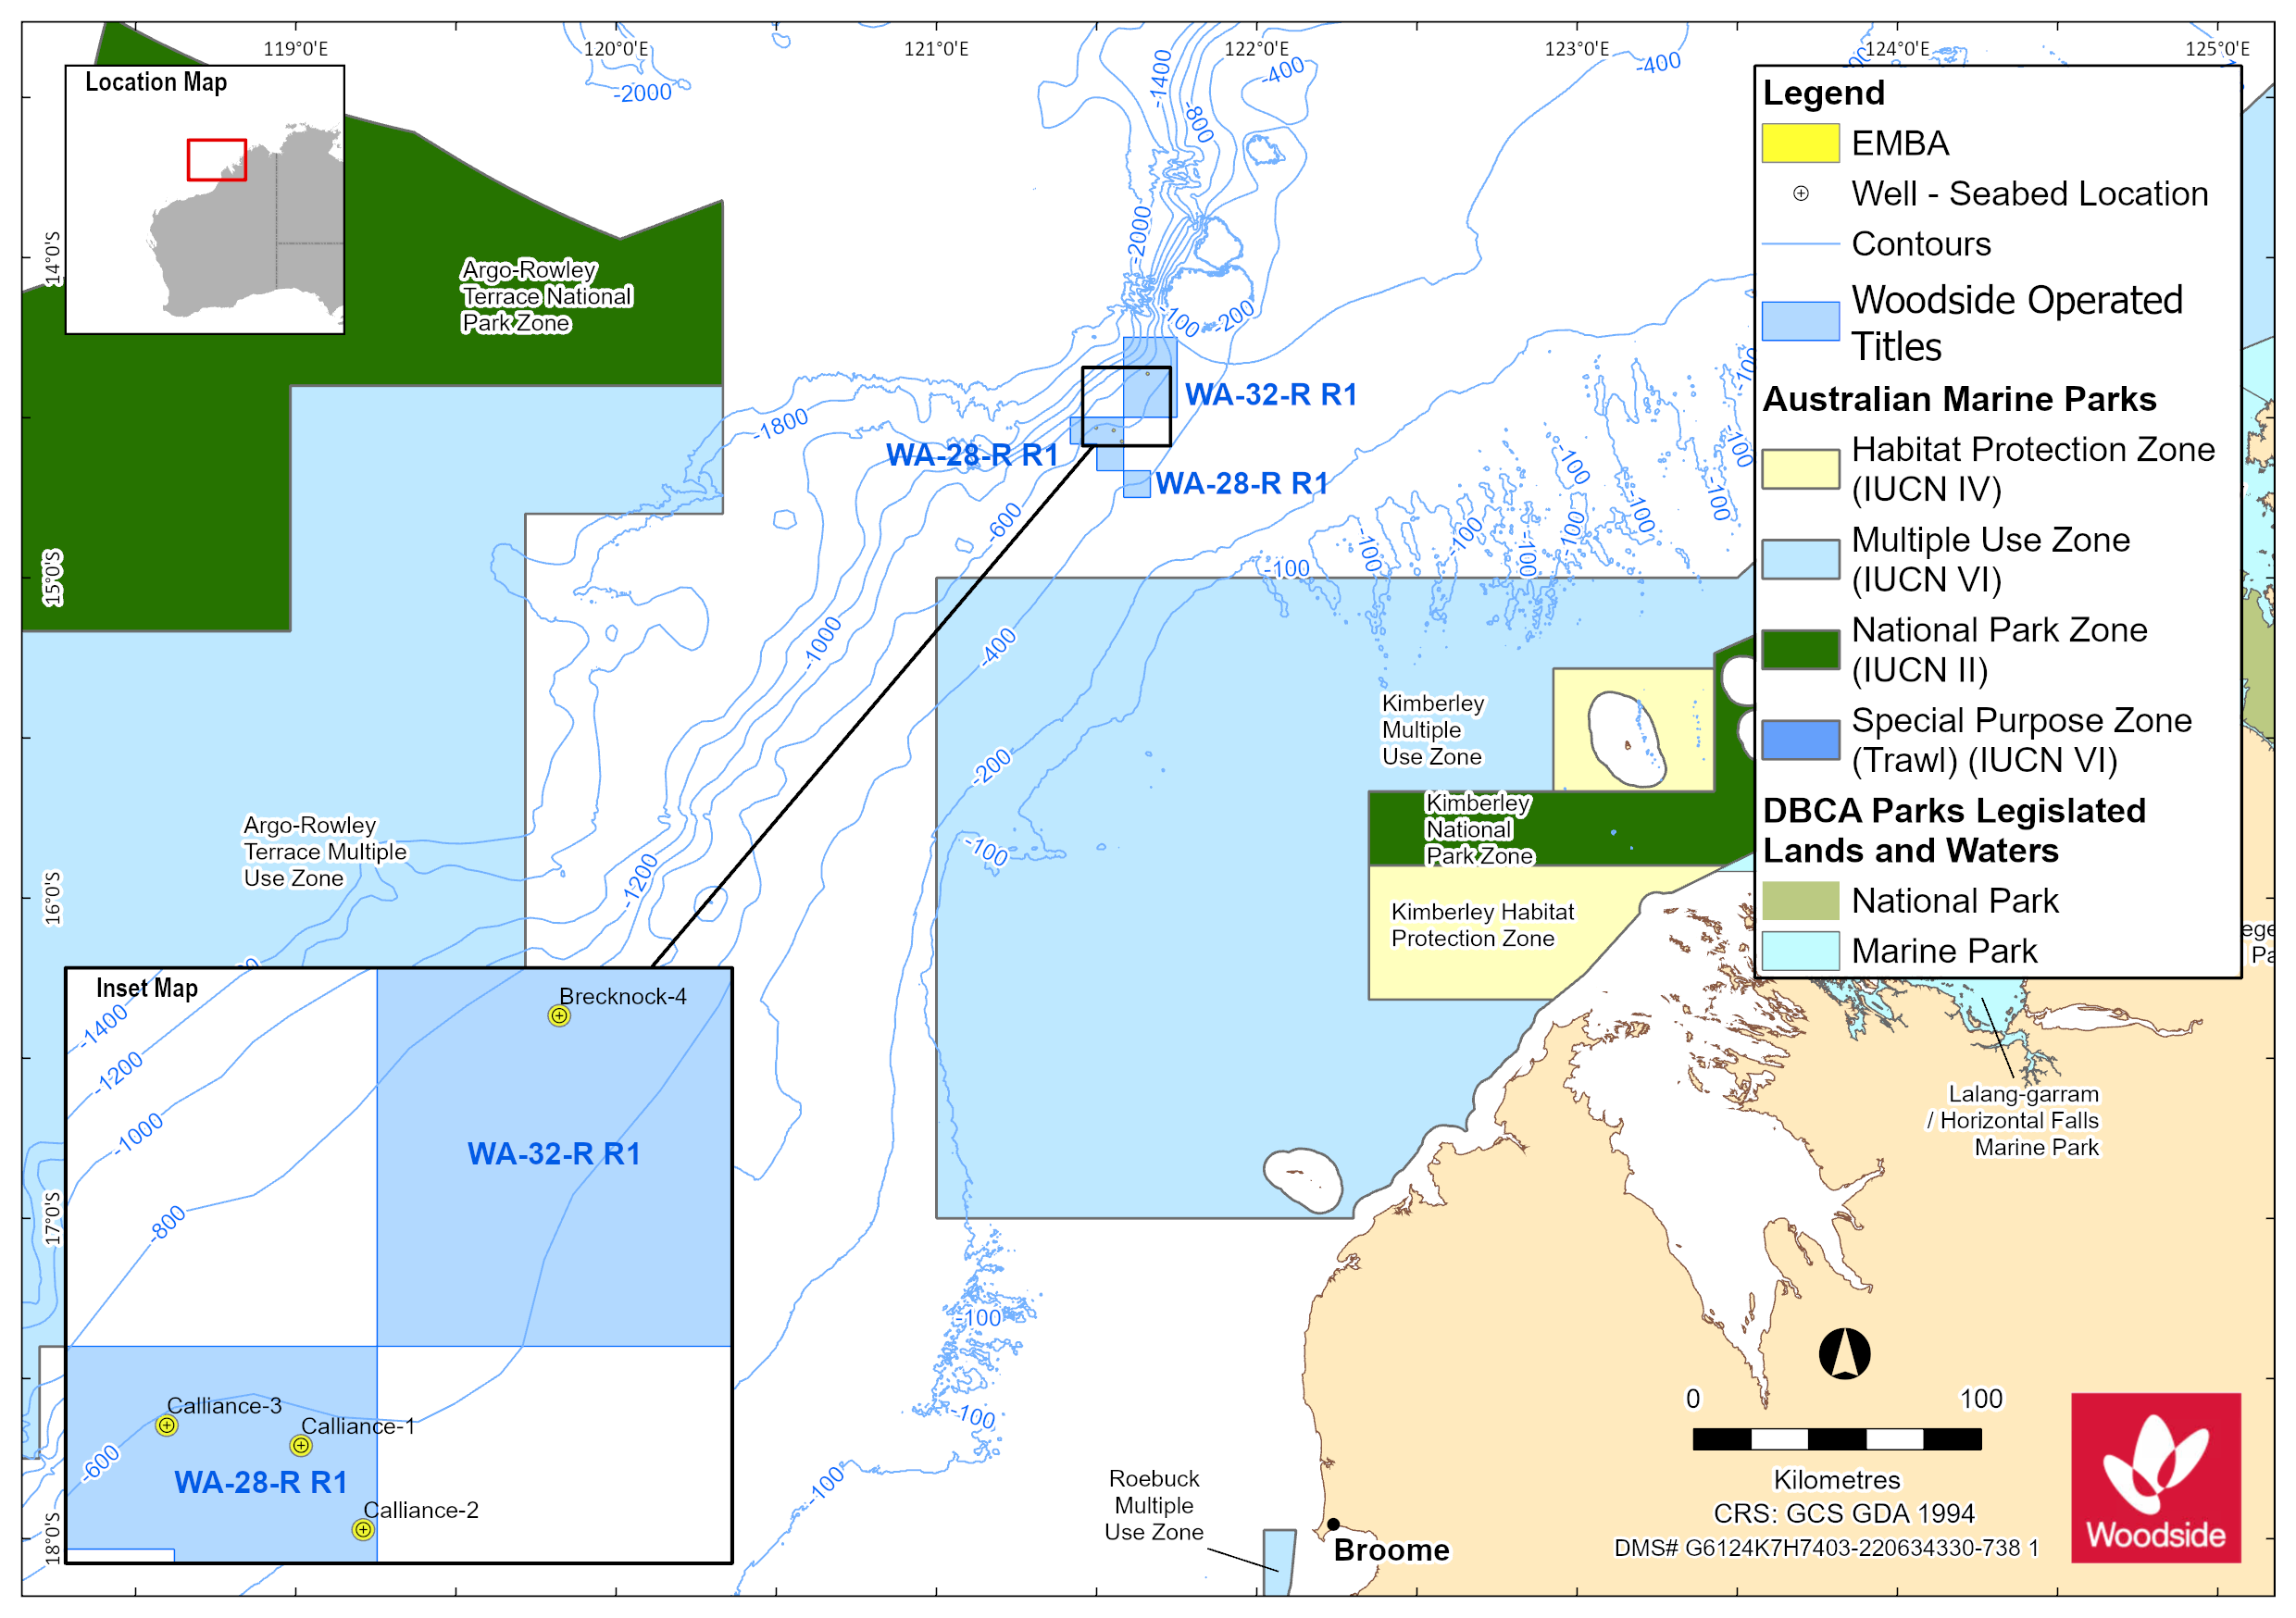 Location map - Activity: Browse Commonwealth Wellhead Decommissioning (refer to description)